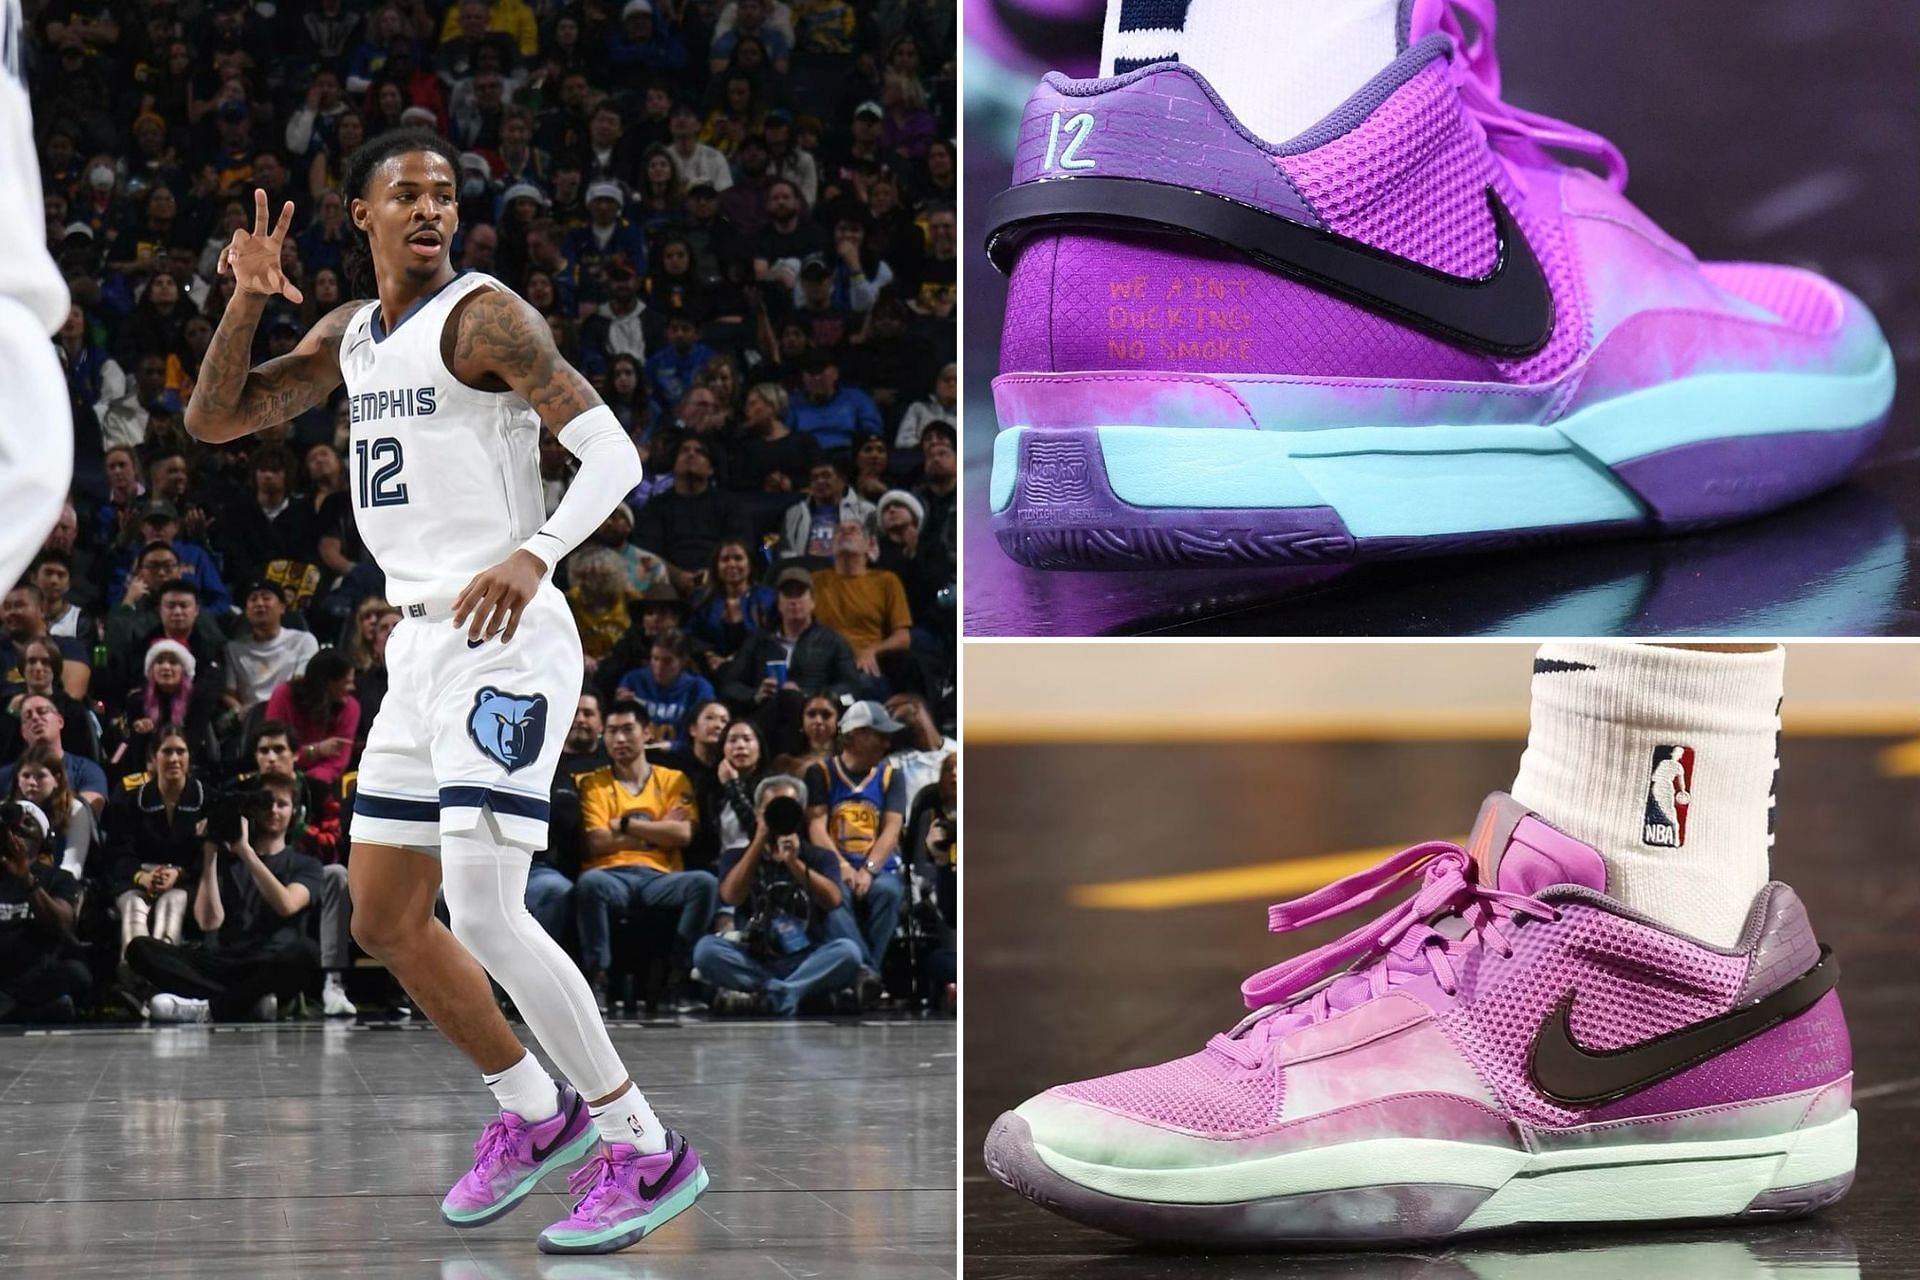 The sneakers worn by Ja Morant of the Memphis Grizzlies during the